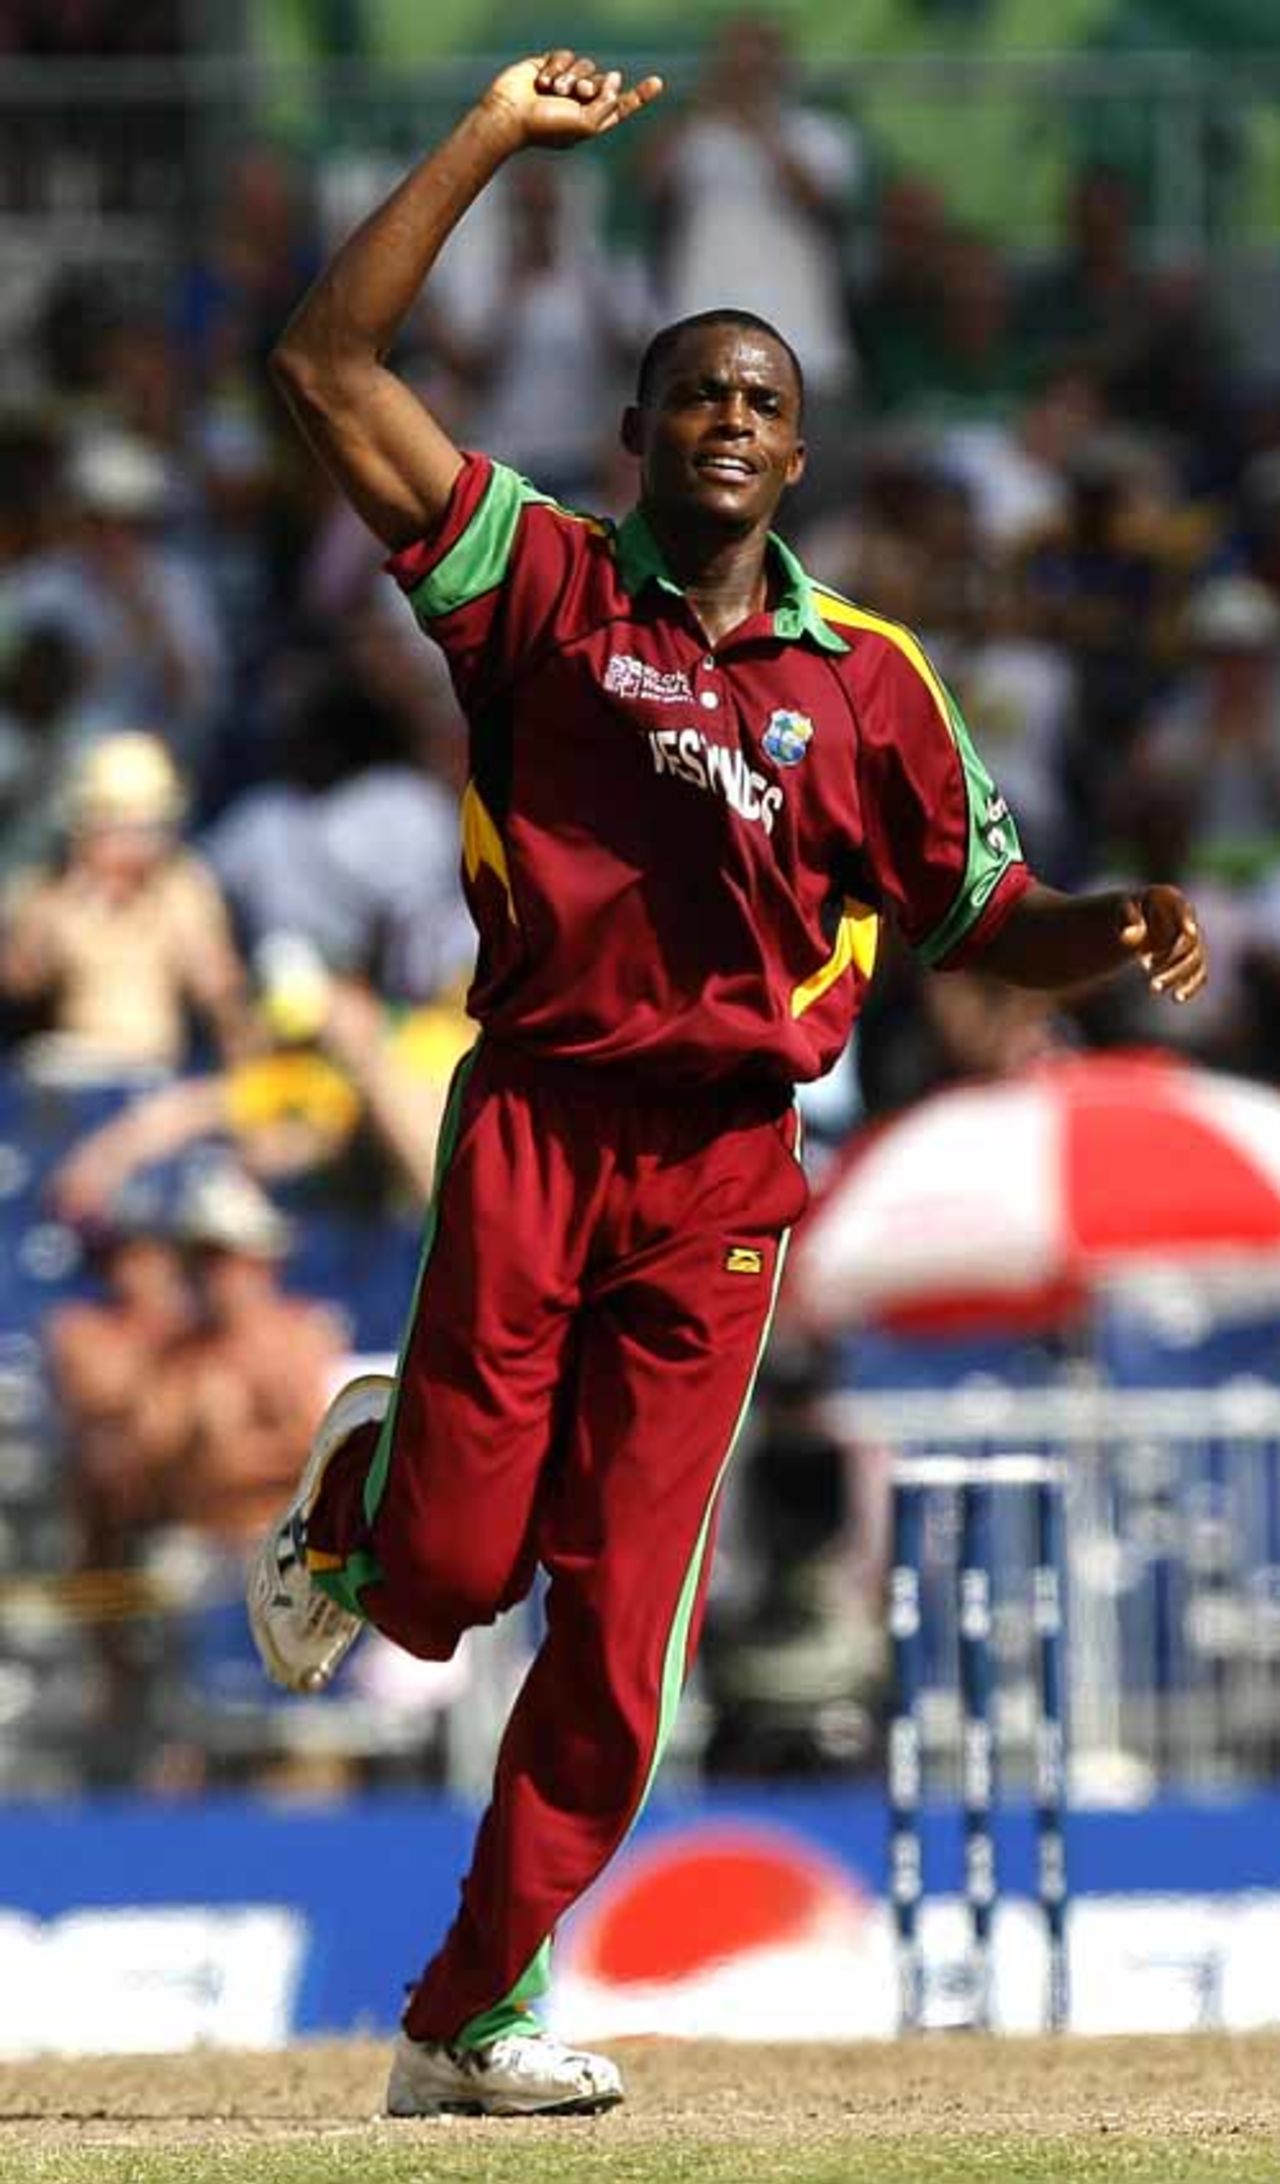 Daren Powell celebrates the wicket of Habibul Bashar as Bangladesh crumble to 52 for 6, West Indies v Bangladesh, Super Eights, Barbados, April 19, 2007